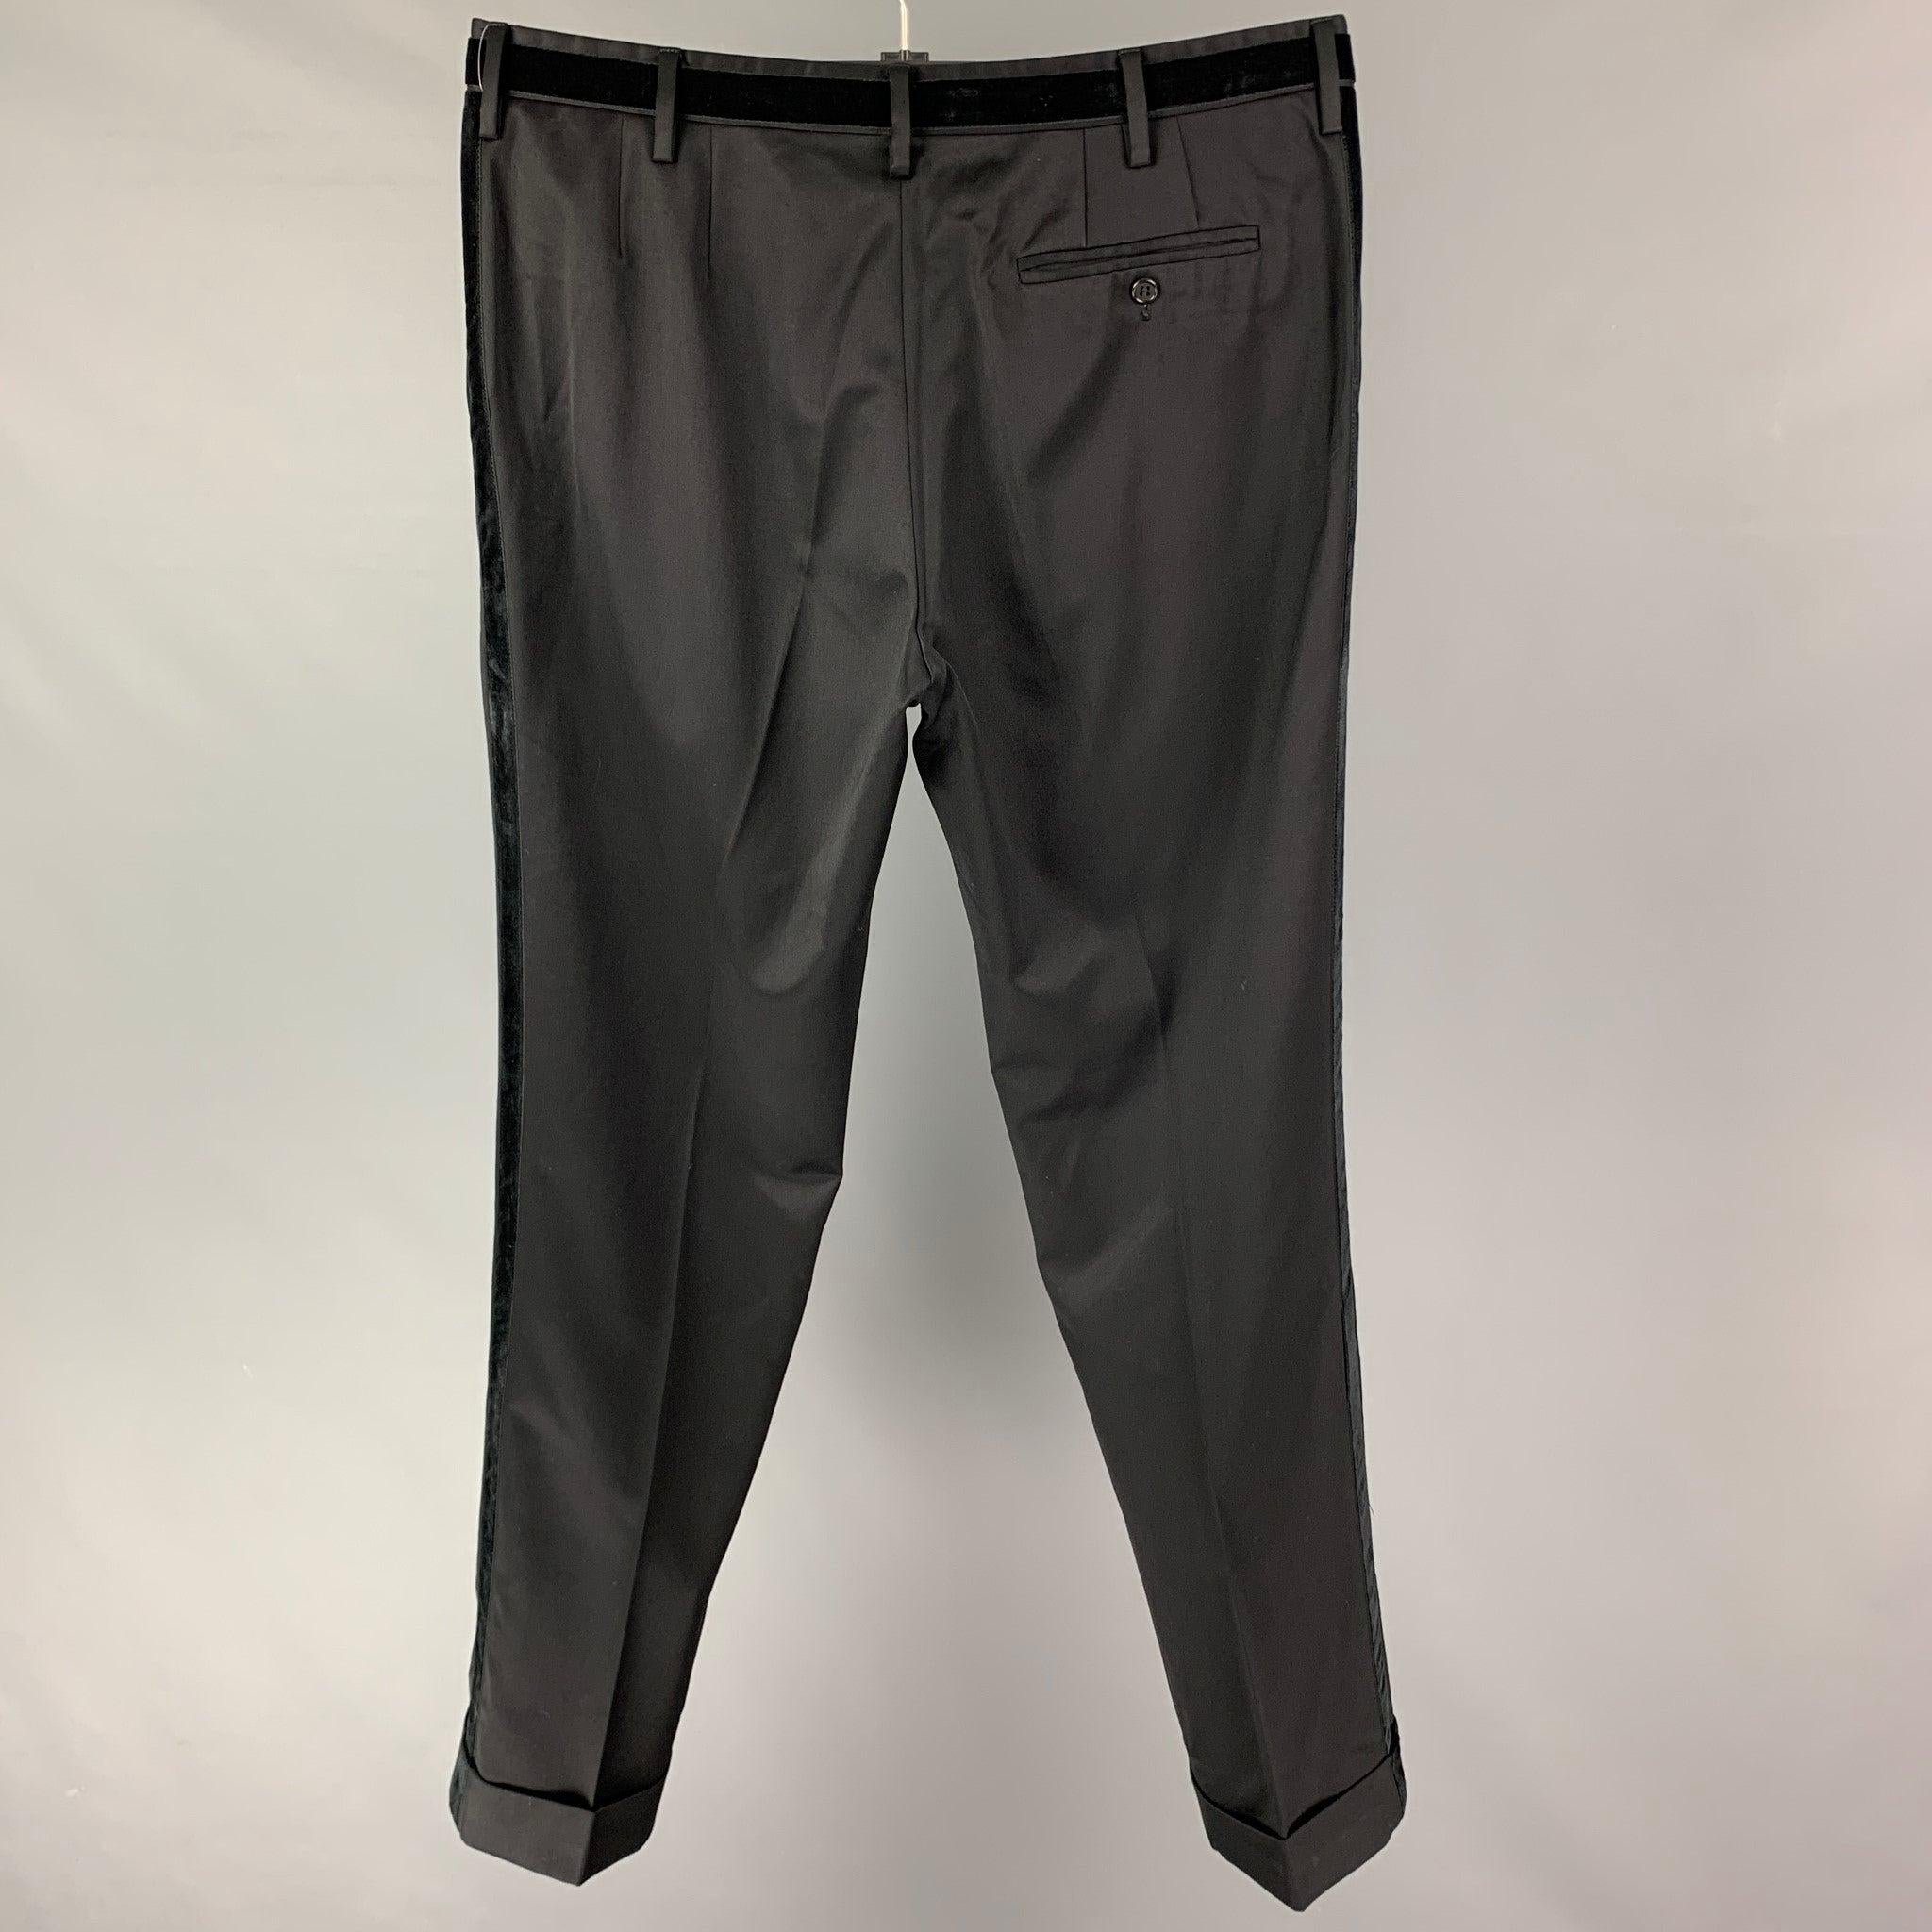 PAUL SMITH Size 36 Black Wool Tuxedo Dress Pants In Good Condition For Sale In San Francisco, CA